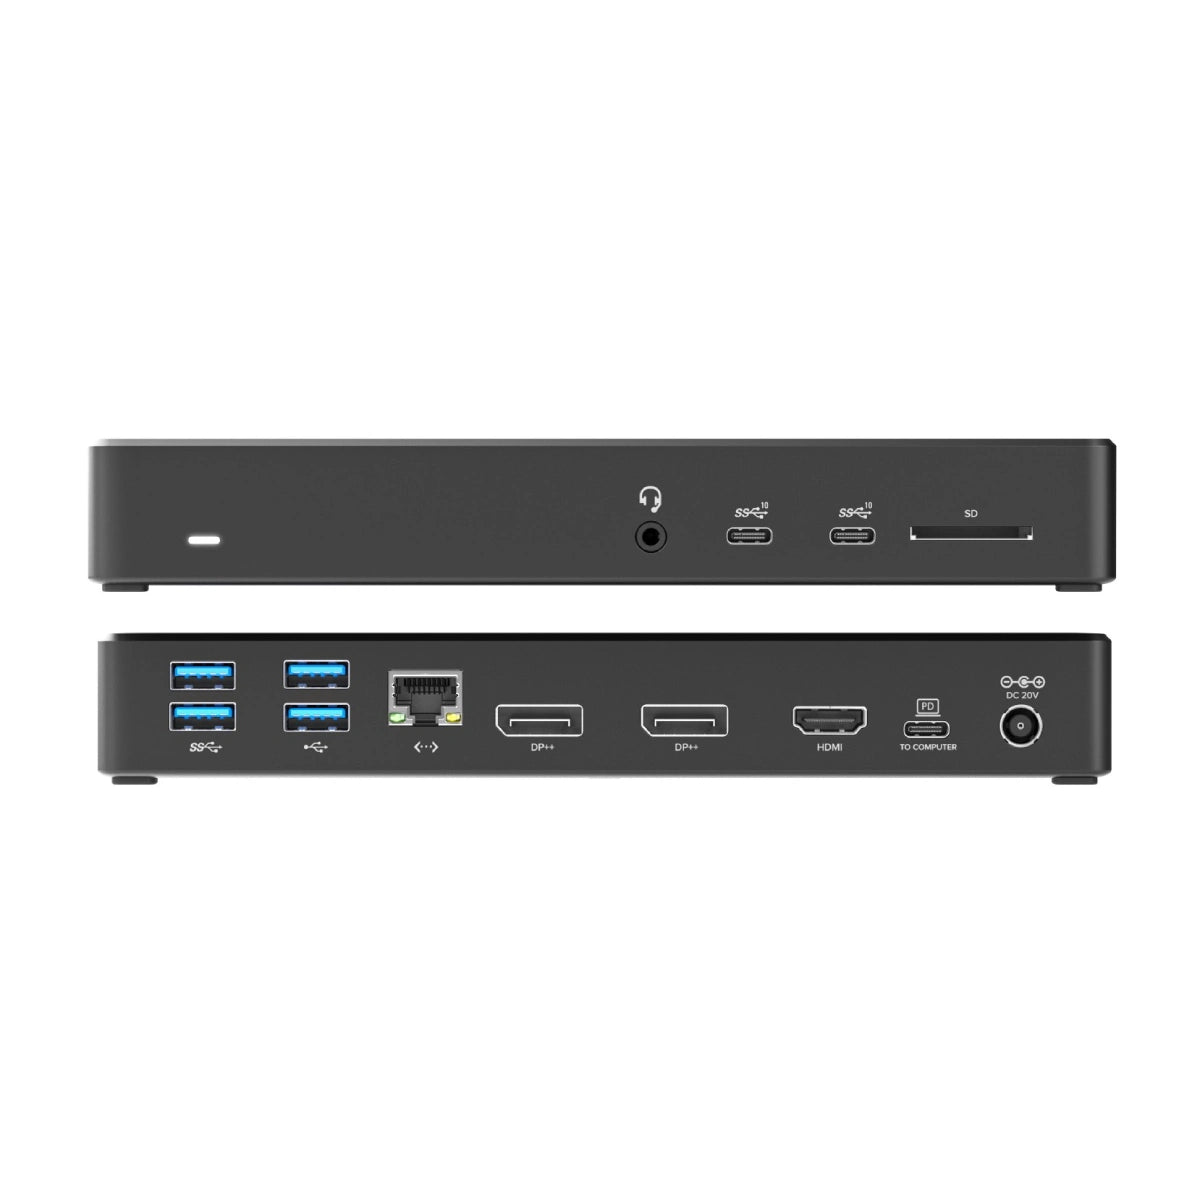 USB-C Triple Display DP Alt. Mode Docking Station – MA3 with 100W Power Delivery (Laptop Charging) - 2 x DP and 1 x HDMI with up to 4K 60Hz Support